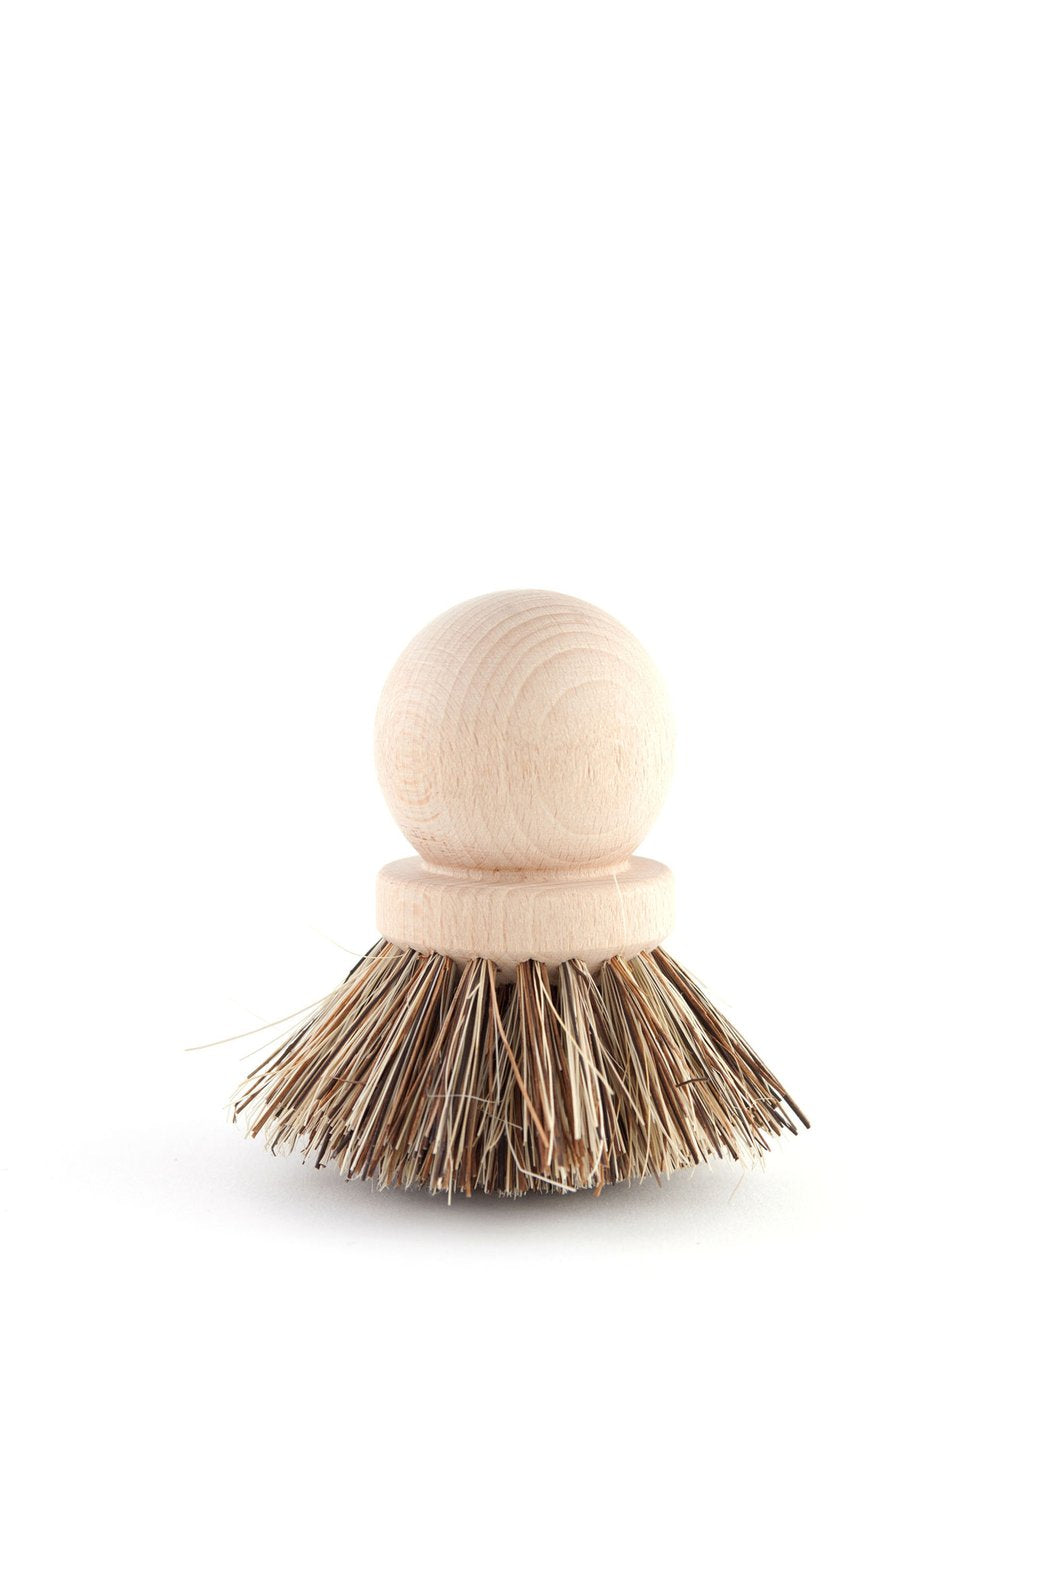 A small, round wooden Andrée Jardin Tradition Saucepan Brush with stiff, natural bristles, isolated on a white background.